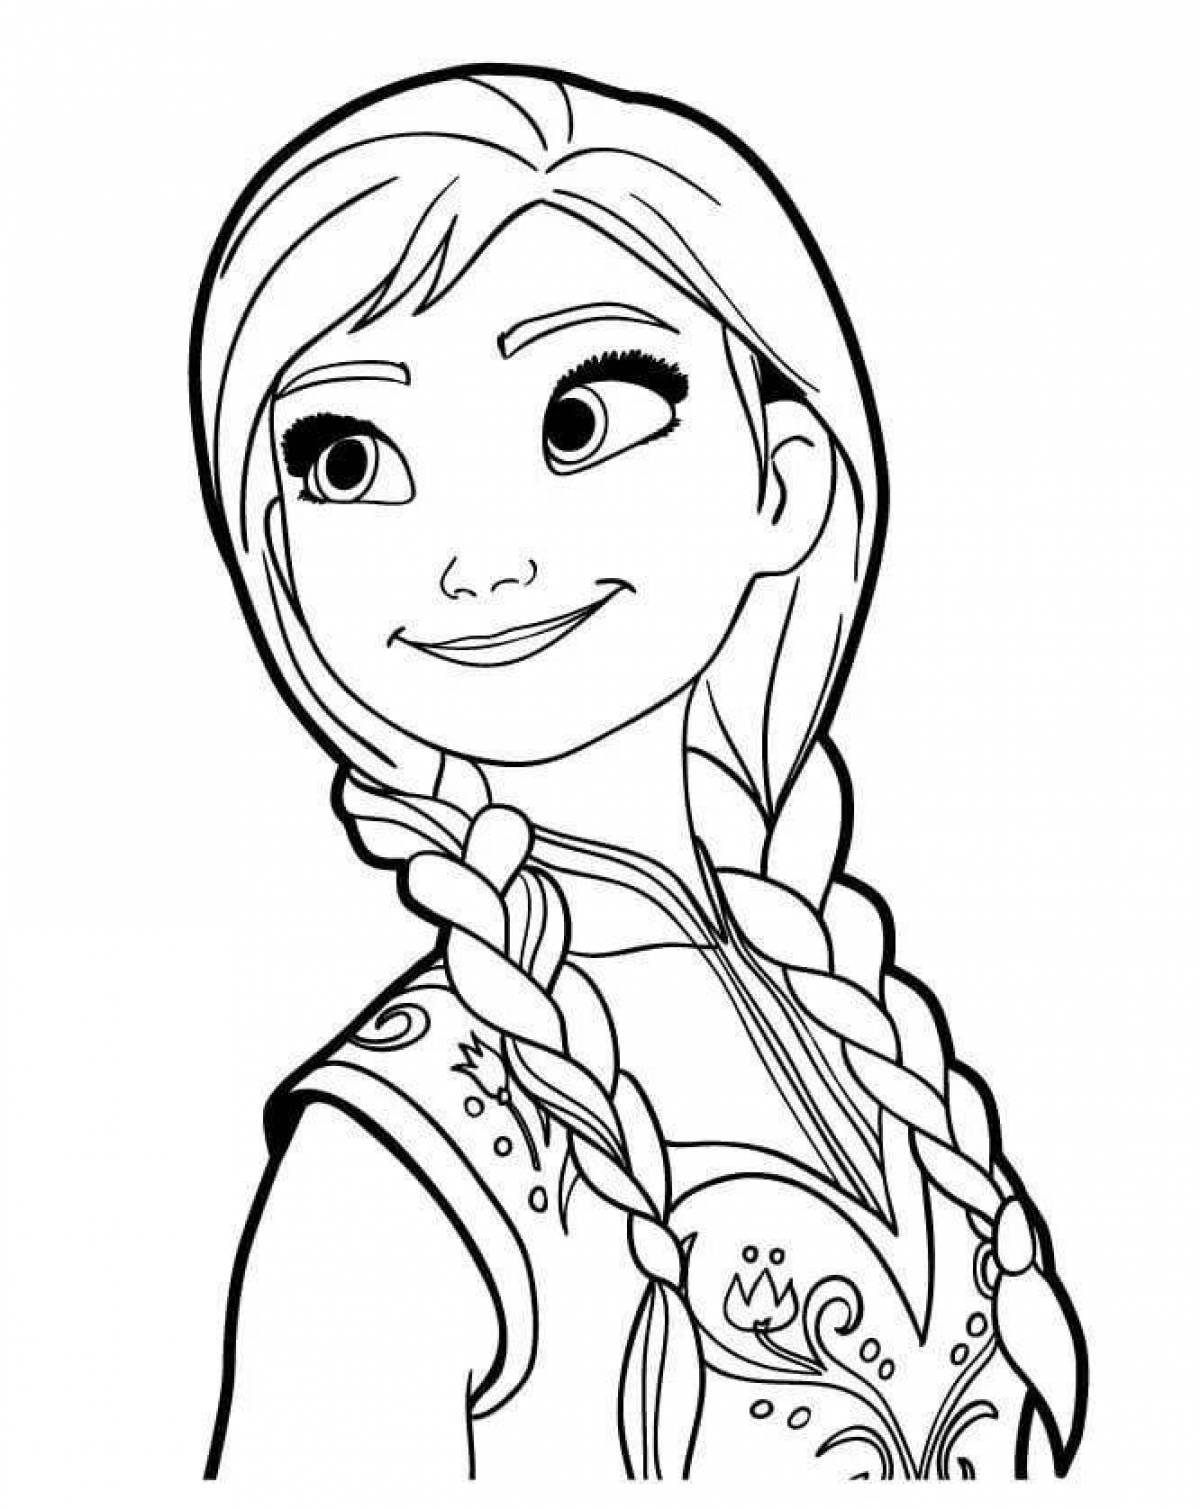 Elsa's exotic coloring book for 5-6 year olds